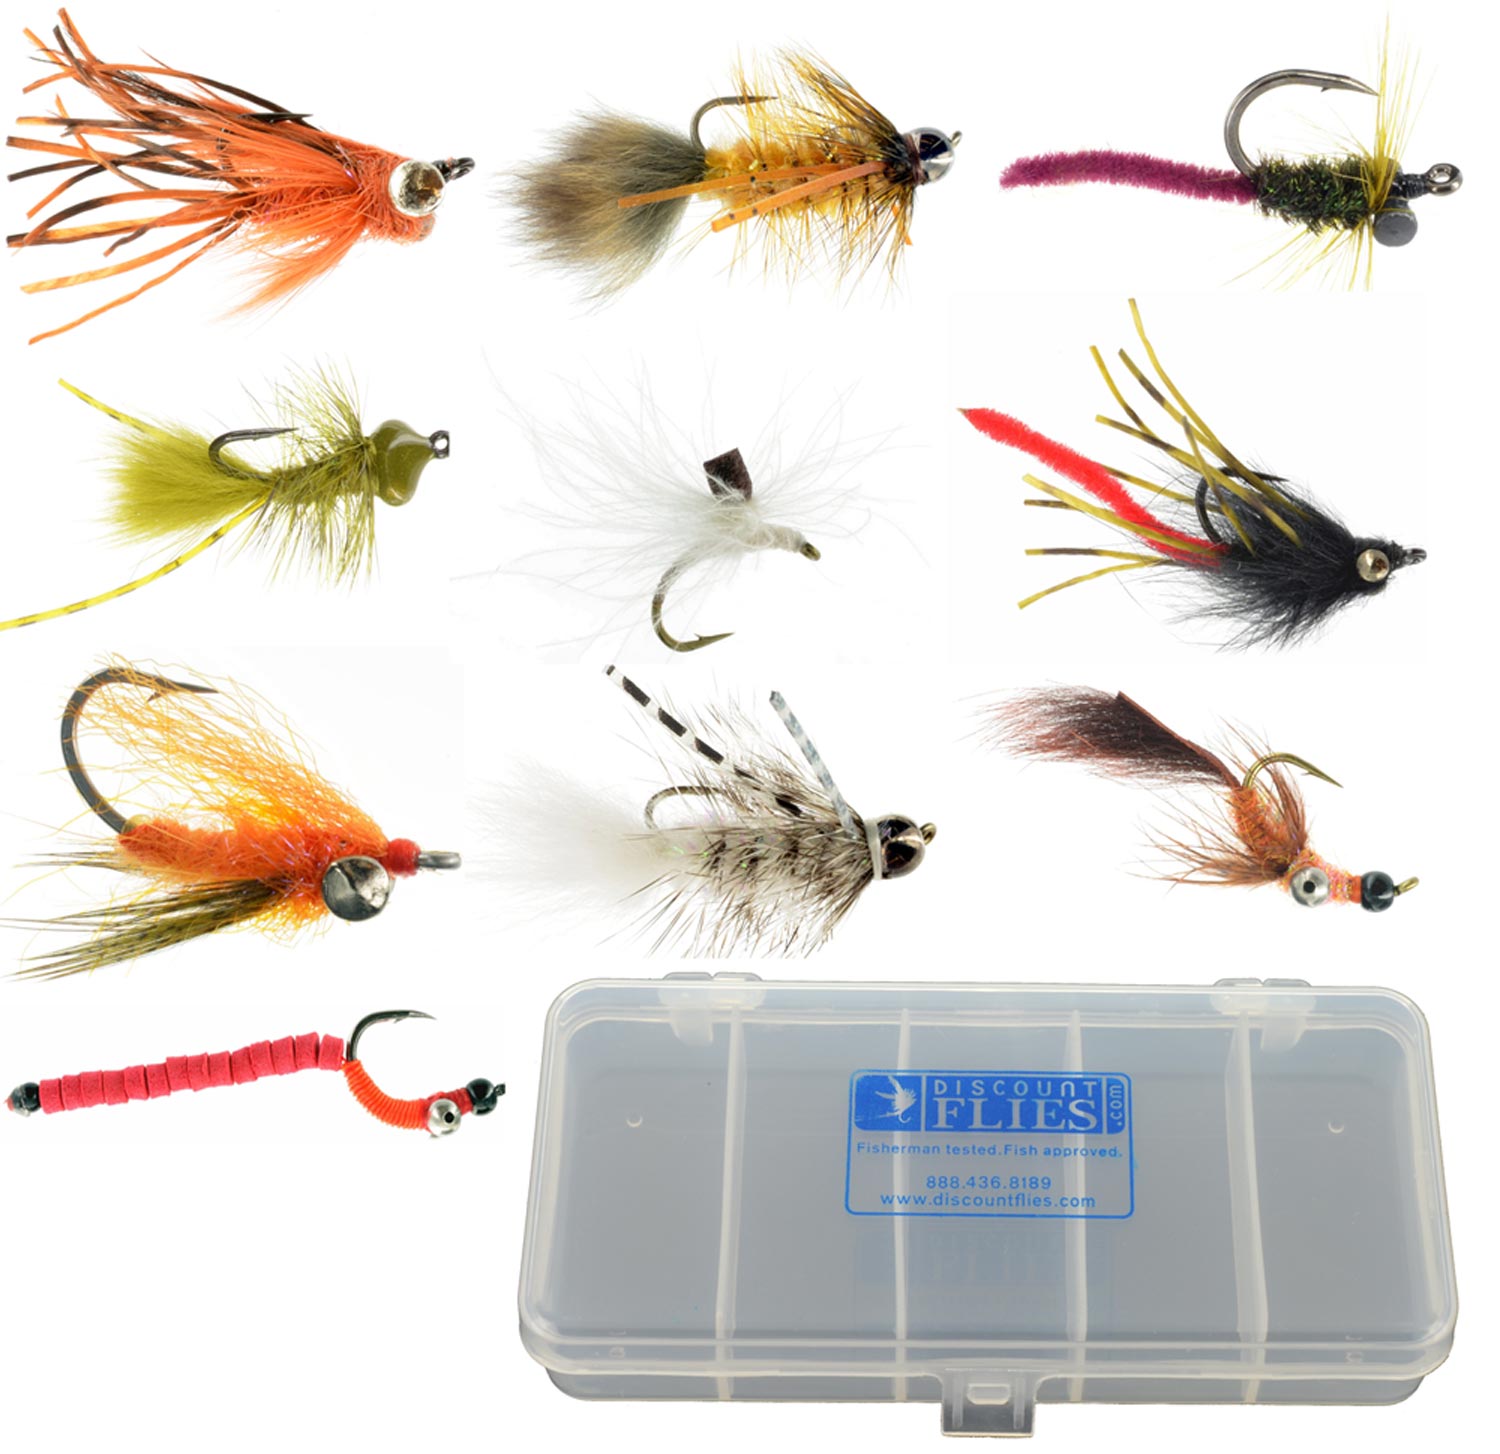 Carp Fly Collection: 10 Flies + Fly Box 